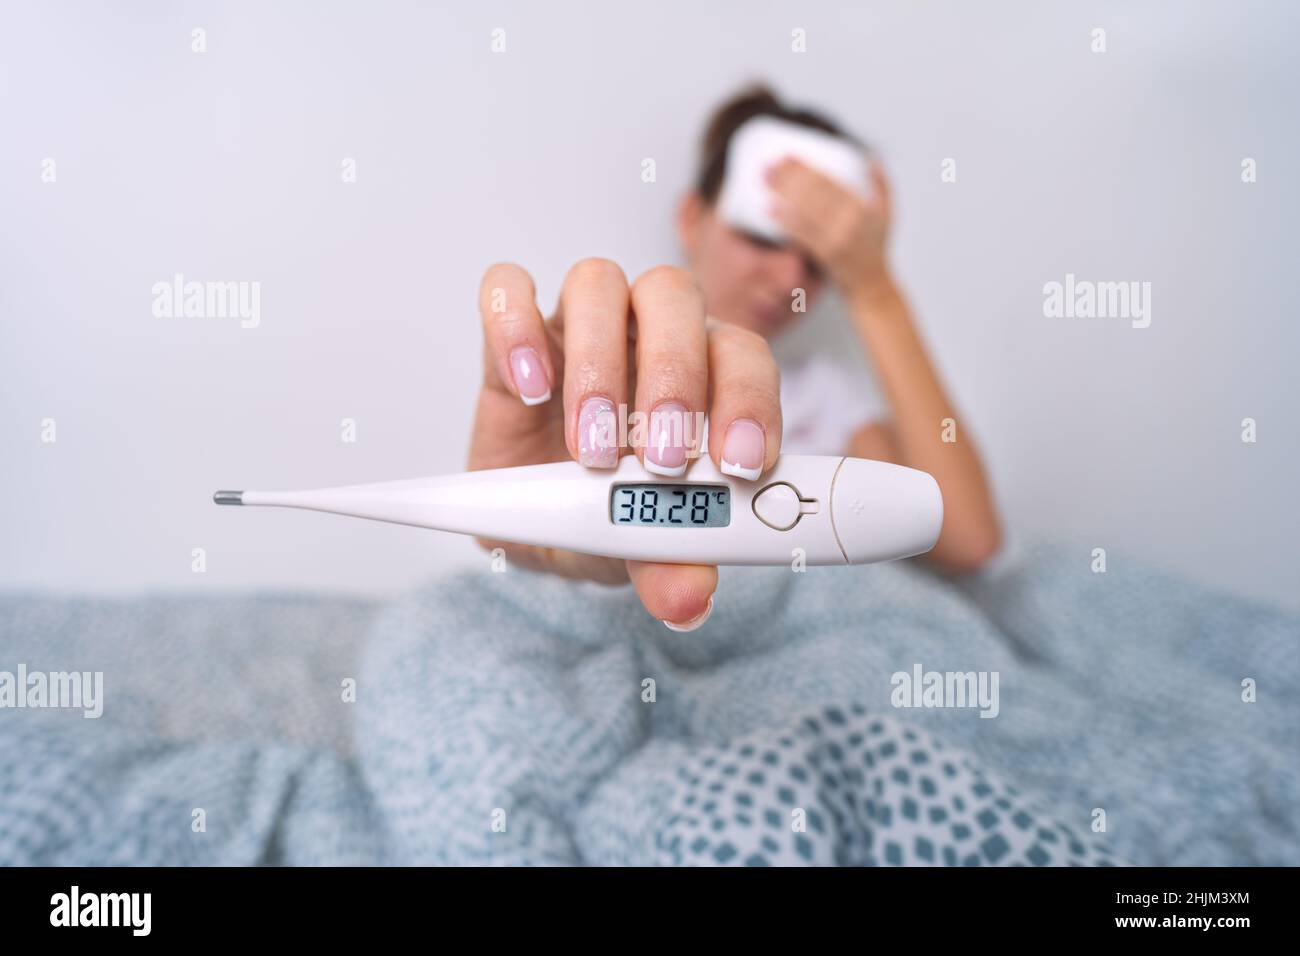 https://c8.alamy.com/comp/2HJM3XM/sick-woman-with-a-high-fever-showing-medical-thermometer-with-temperature-382-woman-measuring-body-temperature-2HJM3XM.jpg